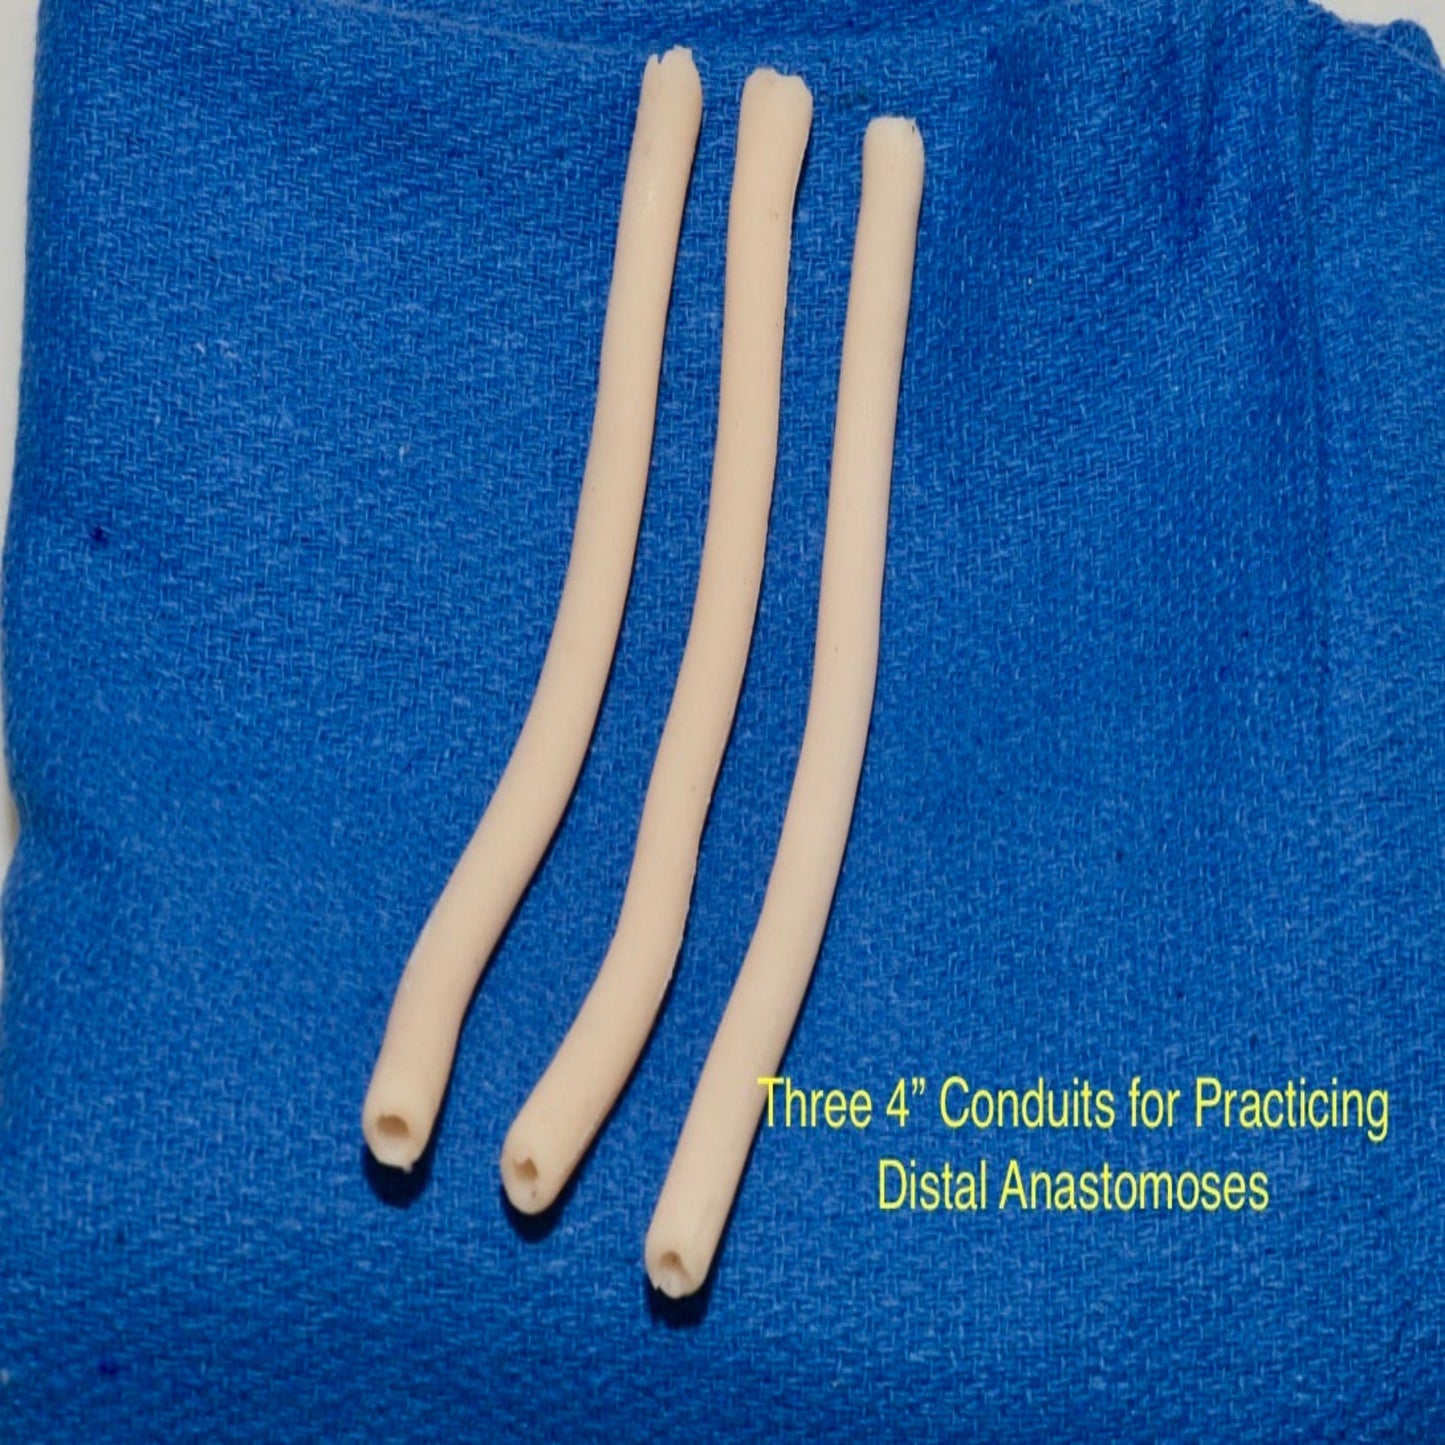 Pack of Three 4" Conduits for Sewing Anastomoses and Assisting with Anastomoses SKU - SSV21002